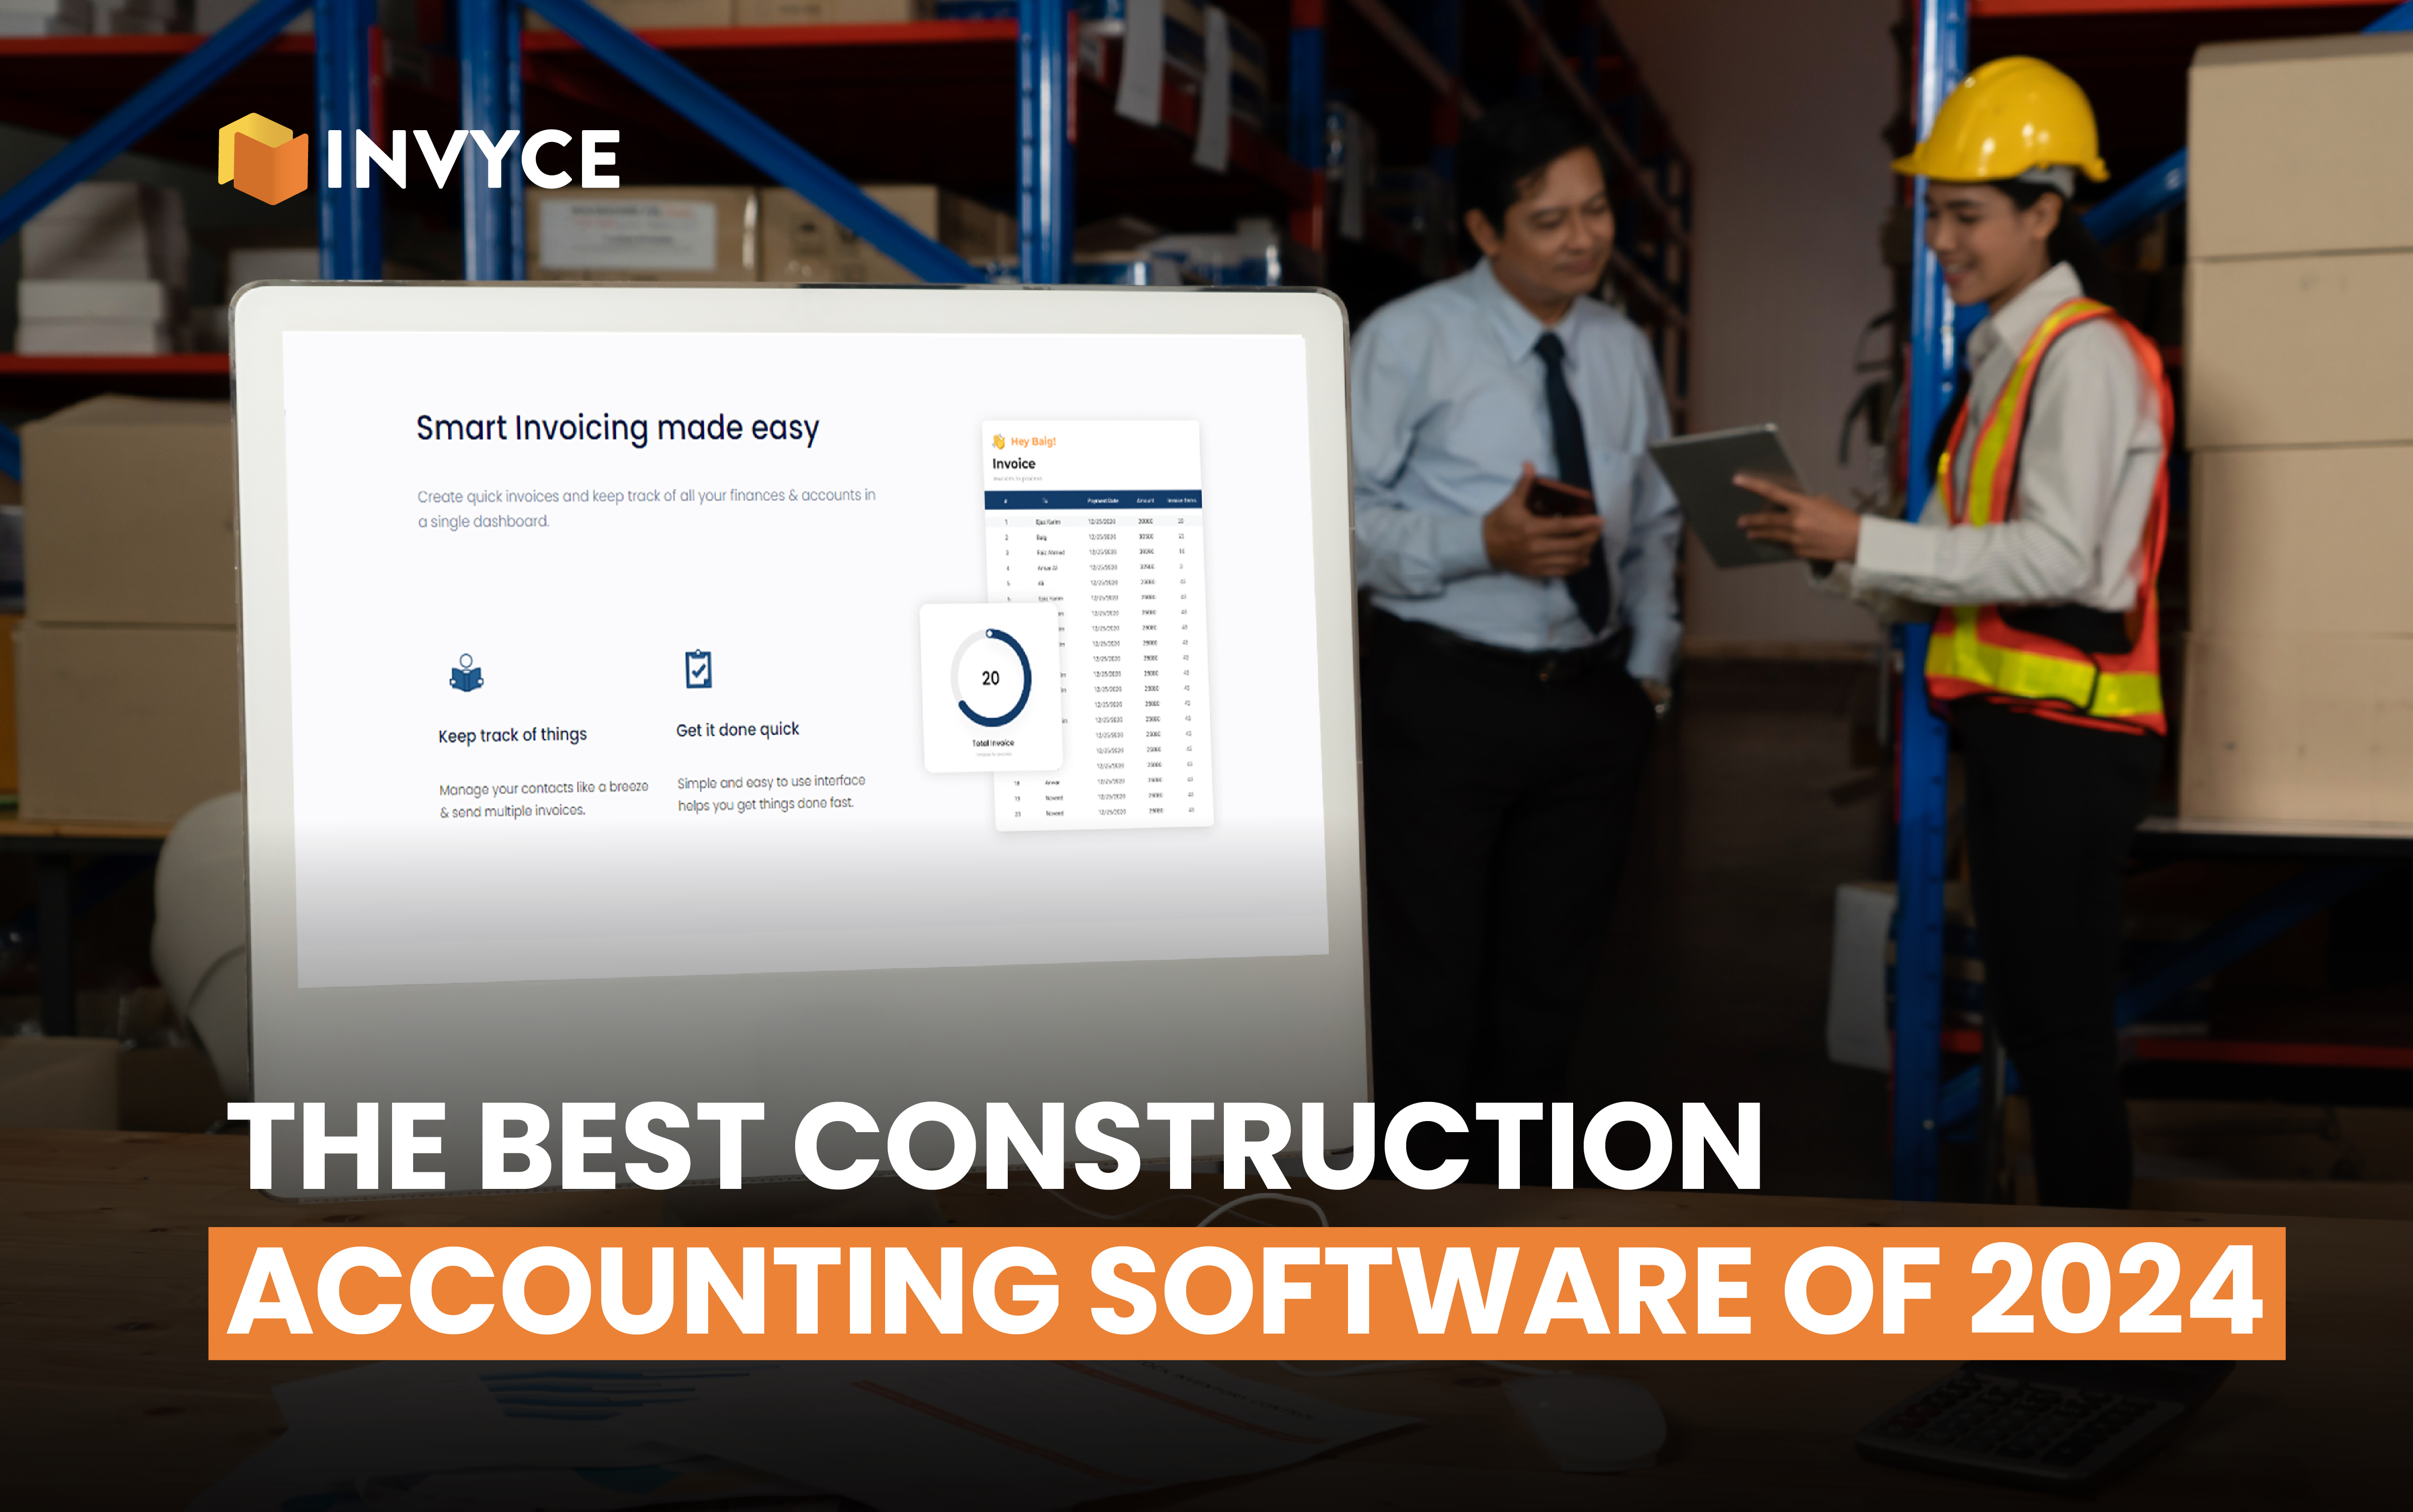 The Best Construction Accounting Software in 2024